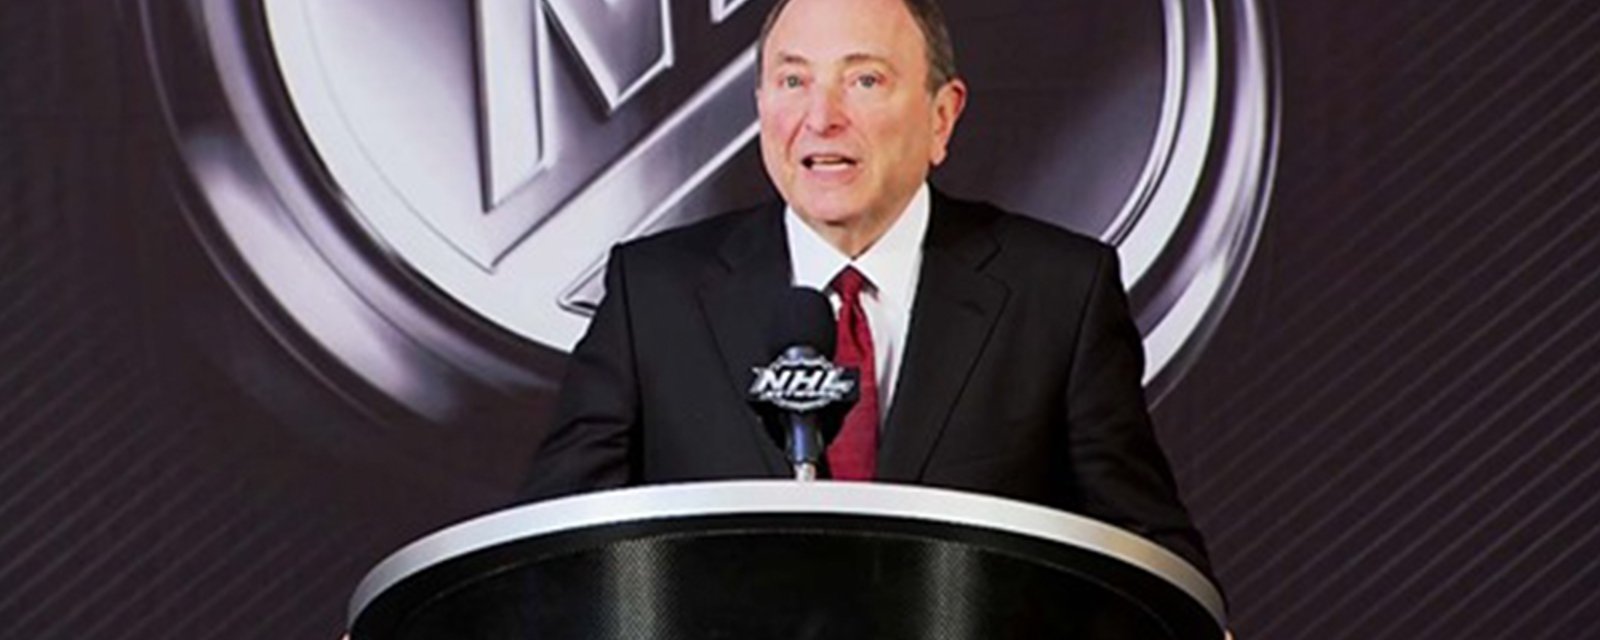 NHL officially cancels practices and meetings for today, decision on 2019-20 season to come